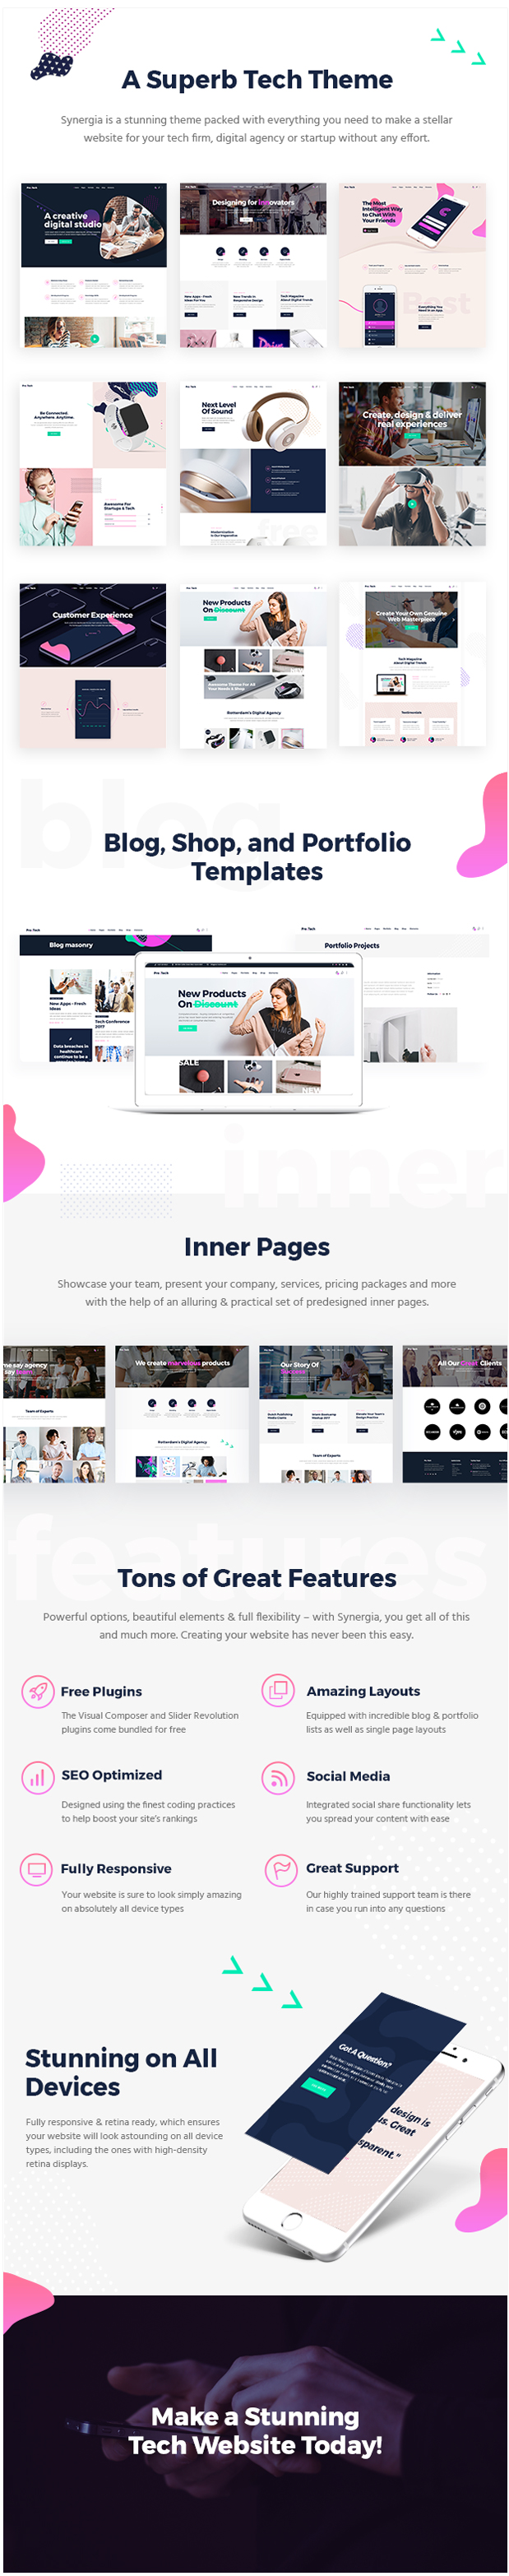 WordPress theme Synergia - A Multi-Concept Theme for Digital Agencies and Startups (Technology)